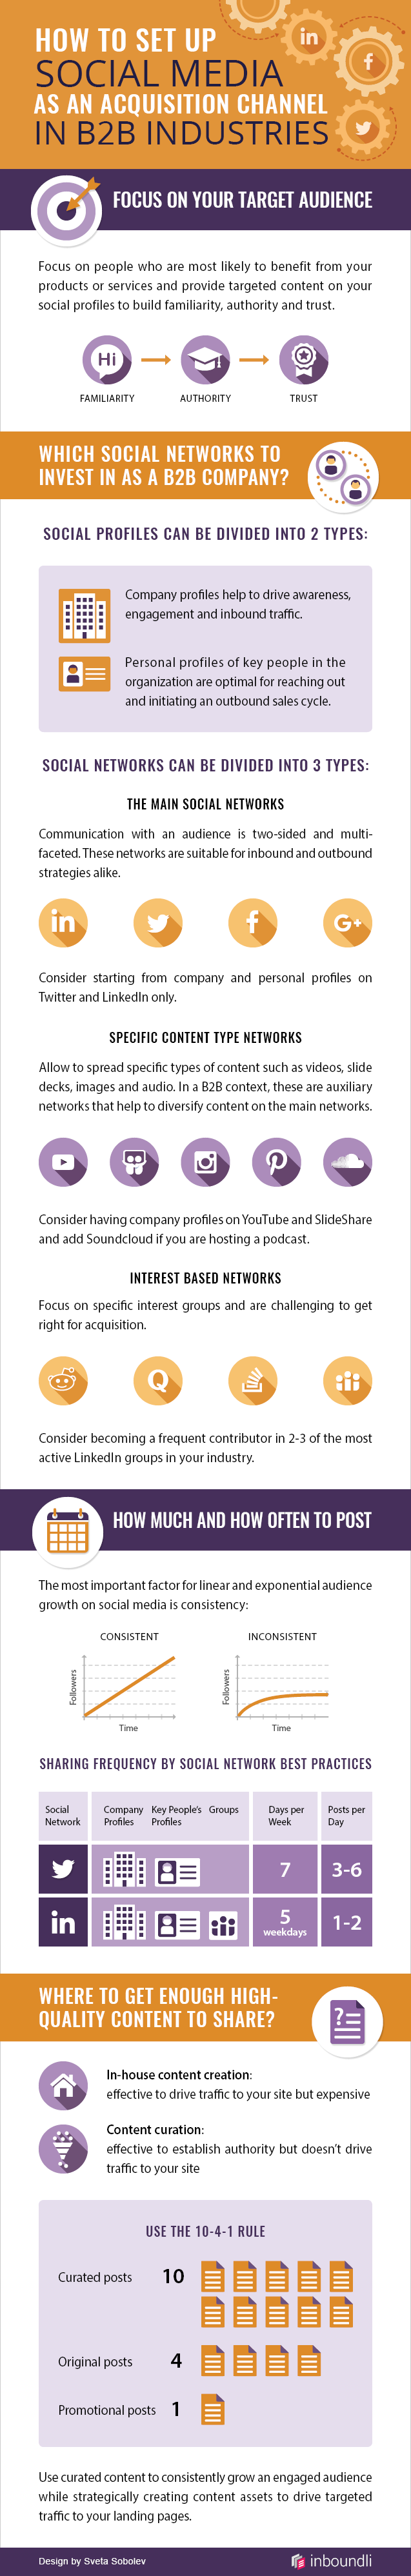 Infographic showing how to setup social media channels as a B2B company